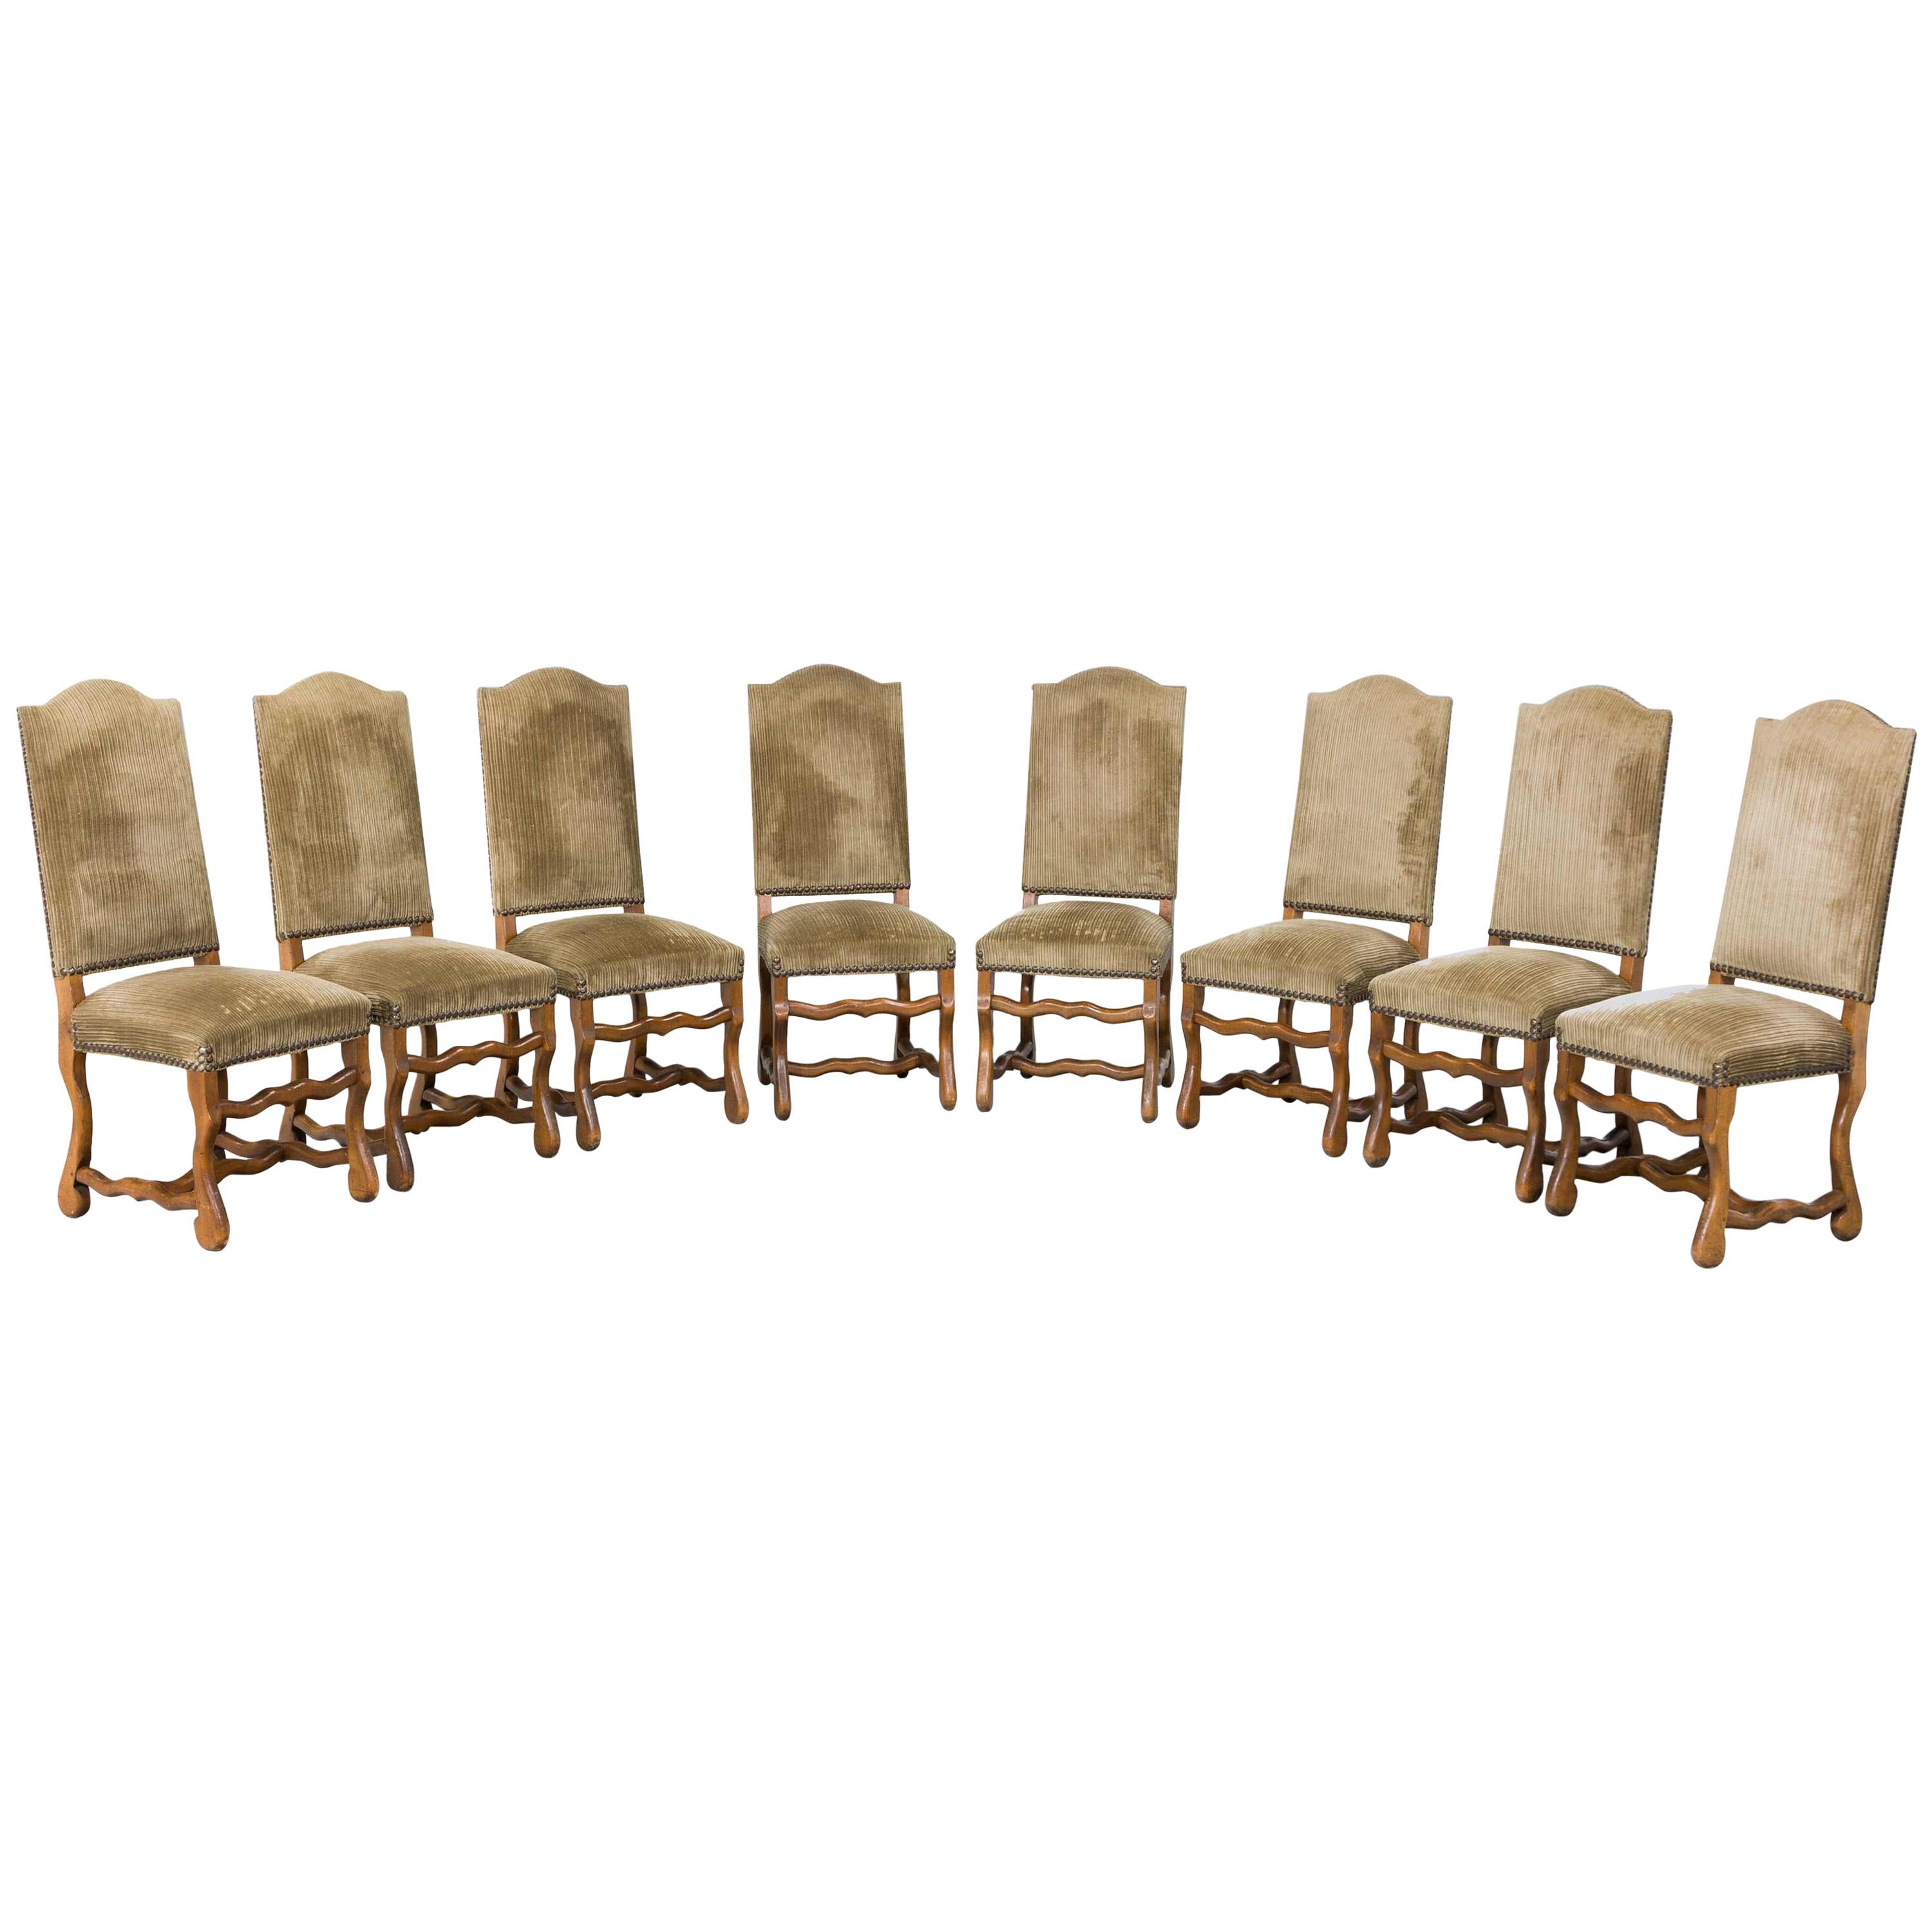 Set of Eight Beech Dining Room Chairs